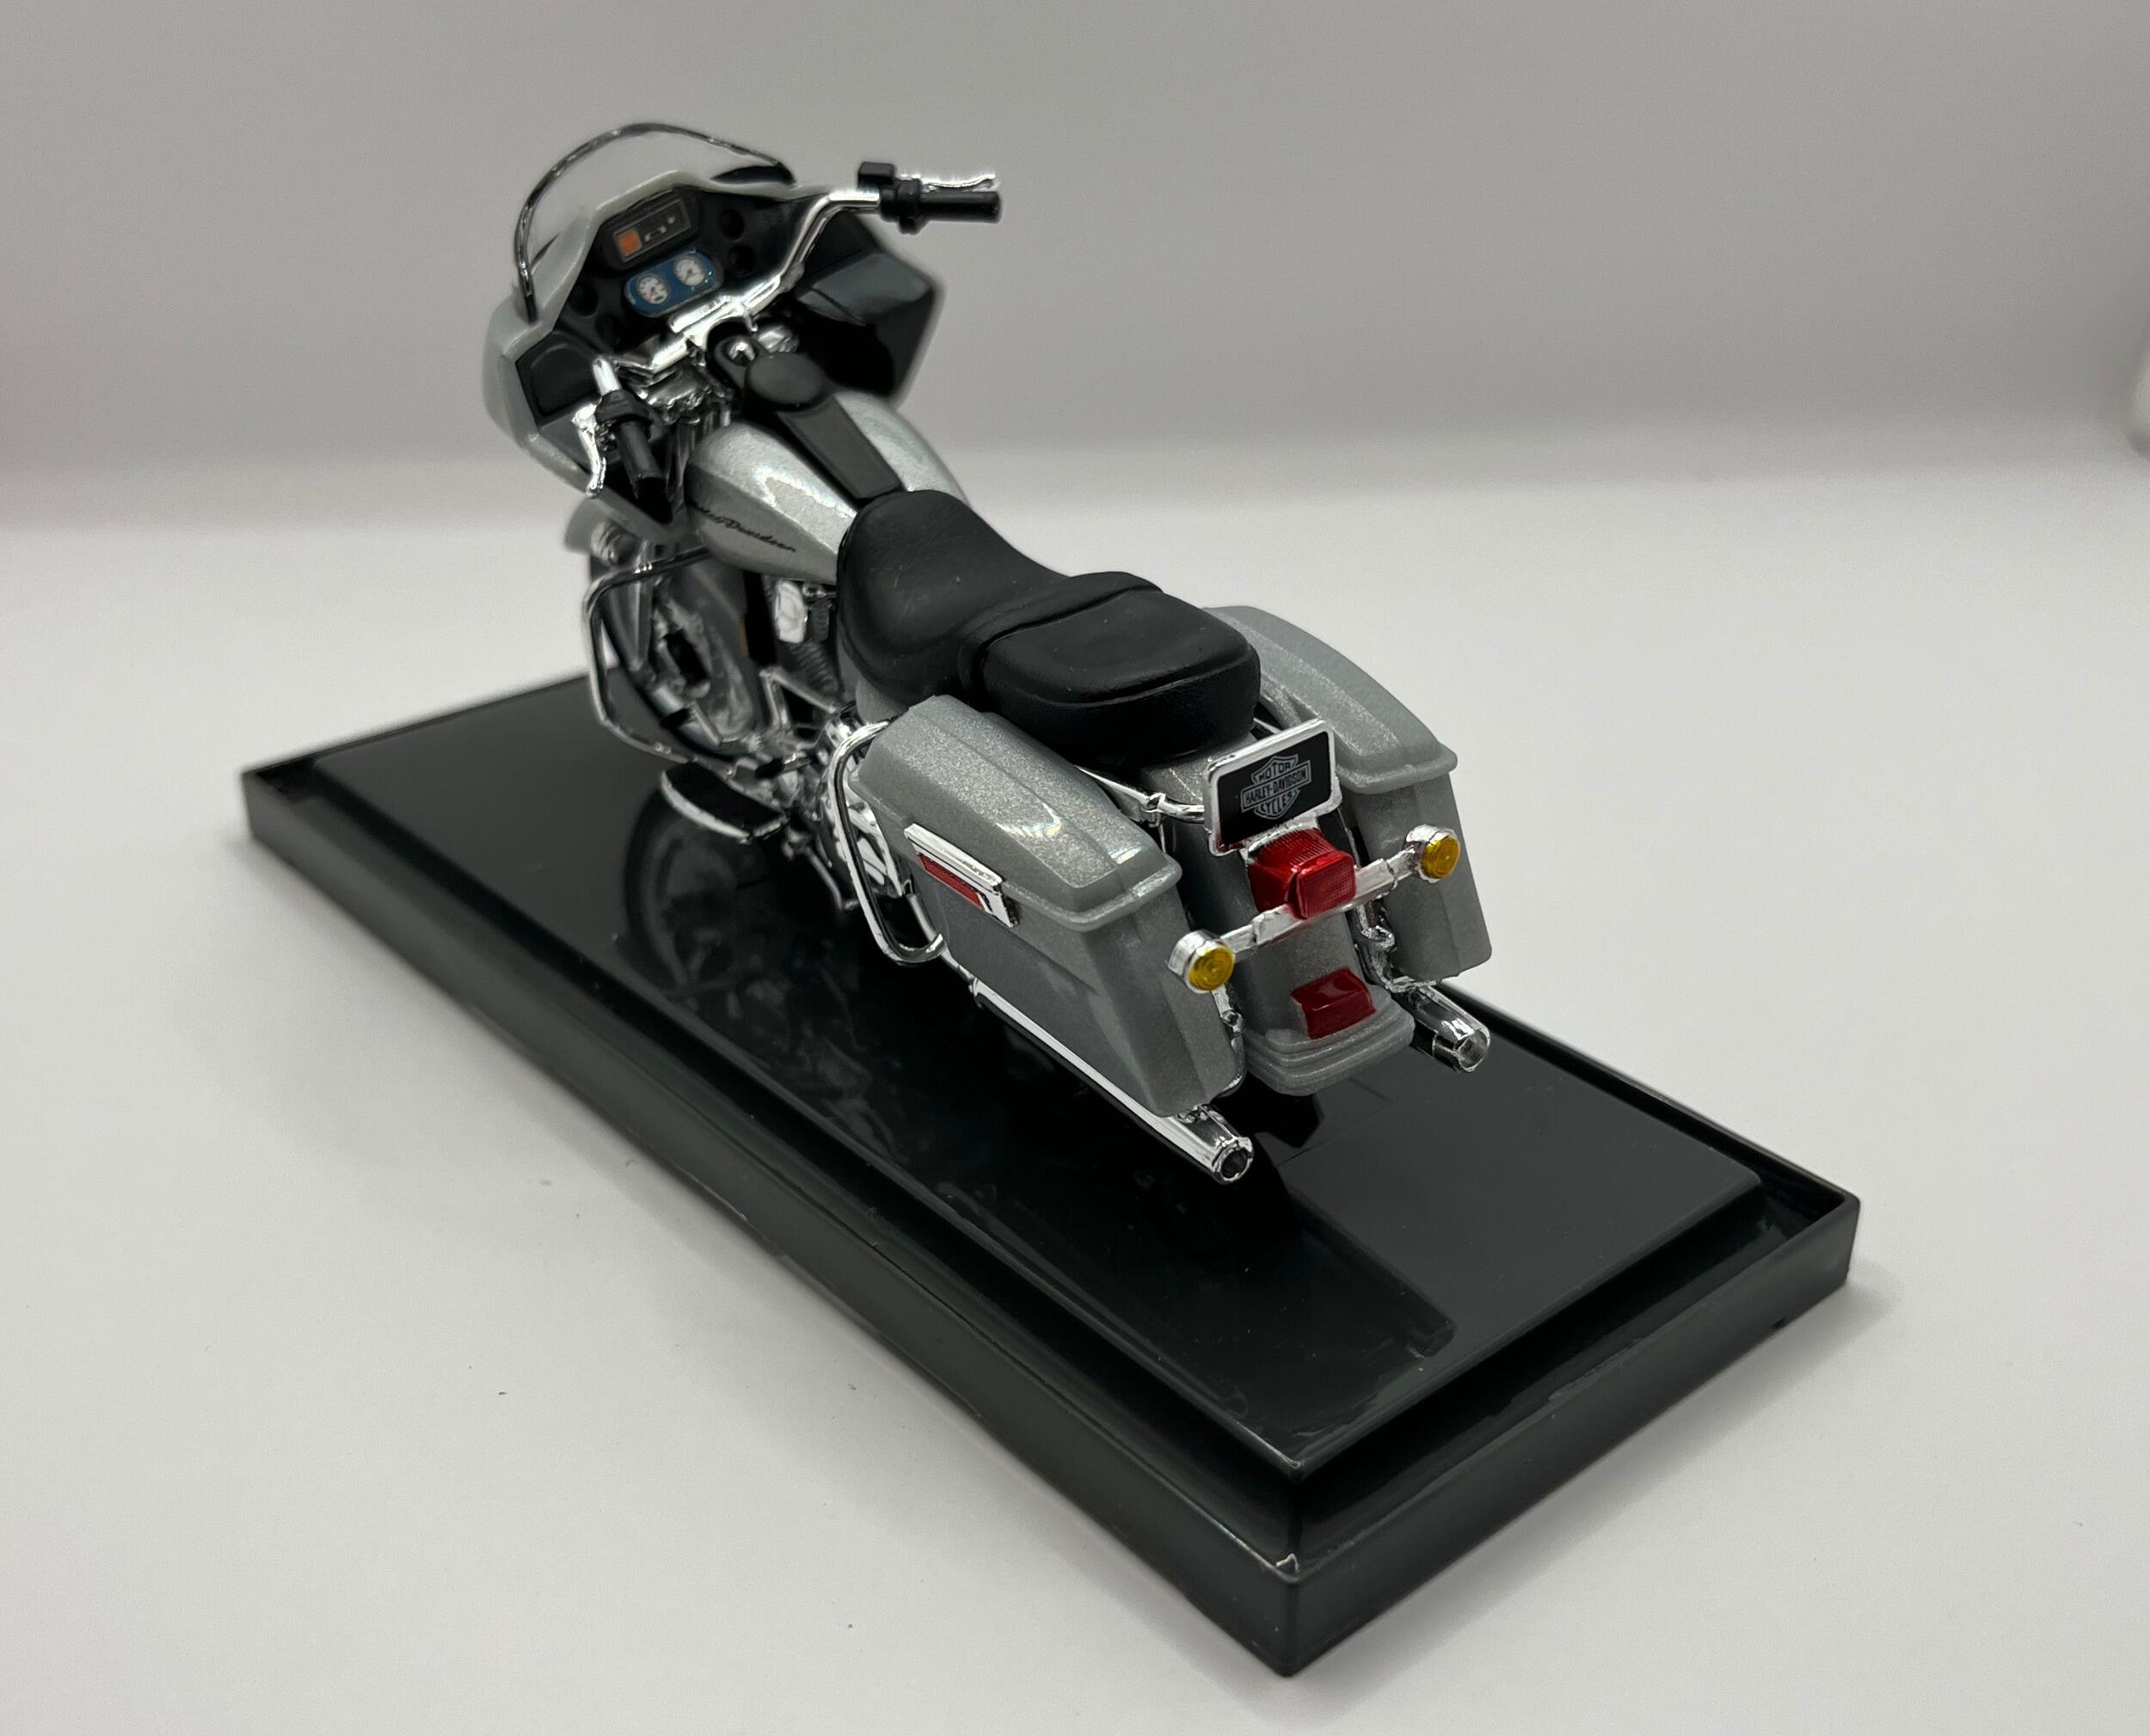 Harley Davidson FLTR Road Glide 2002 in silver, 1:18 scale motorcycle model from Maisto, 21911